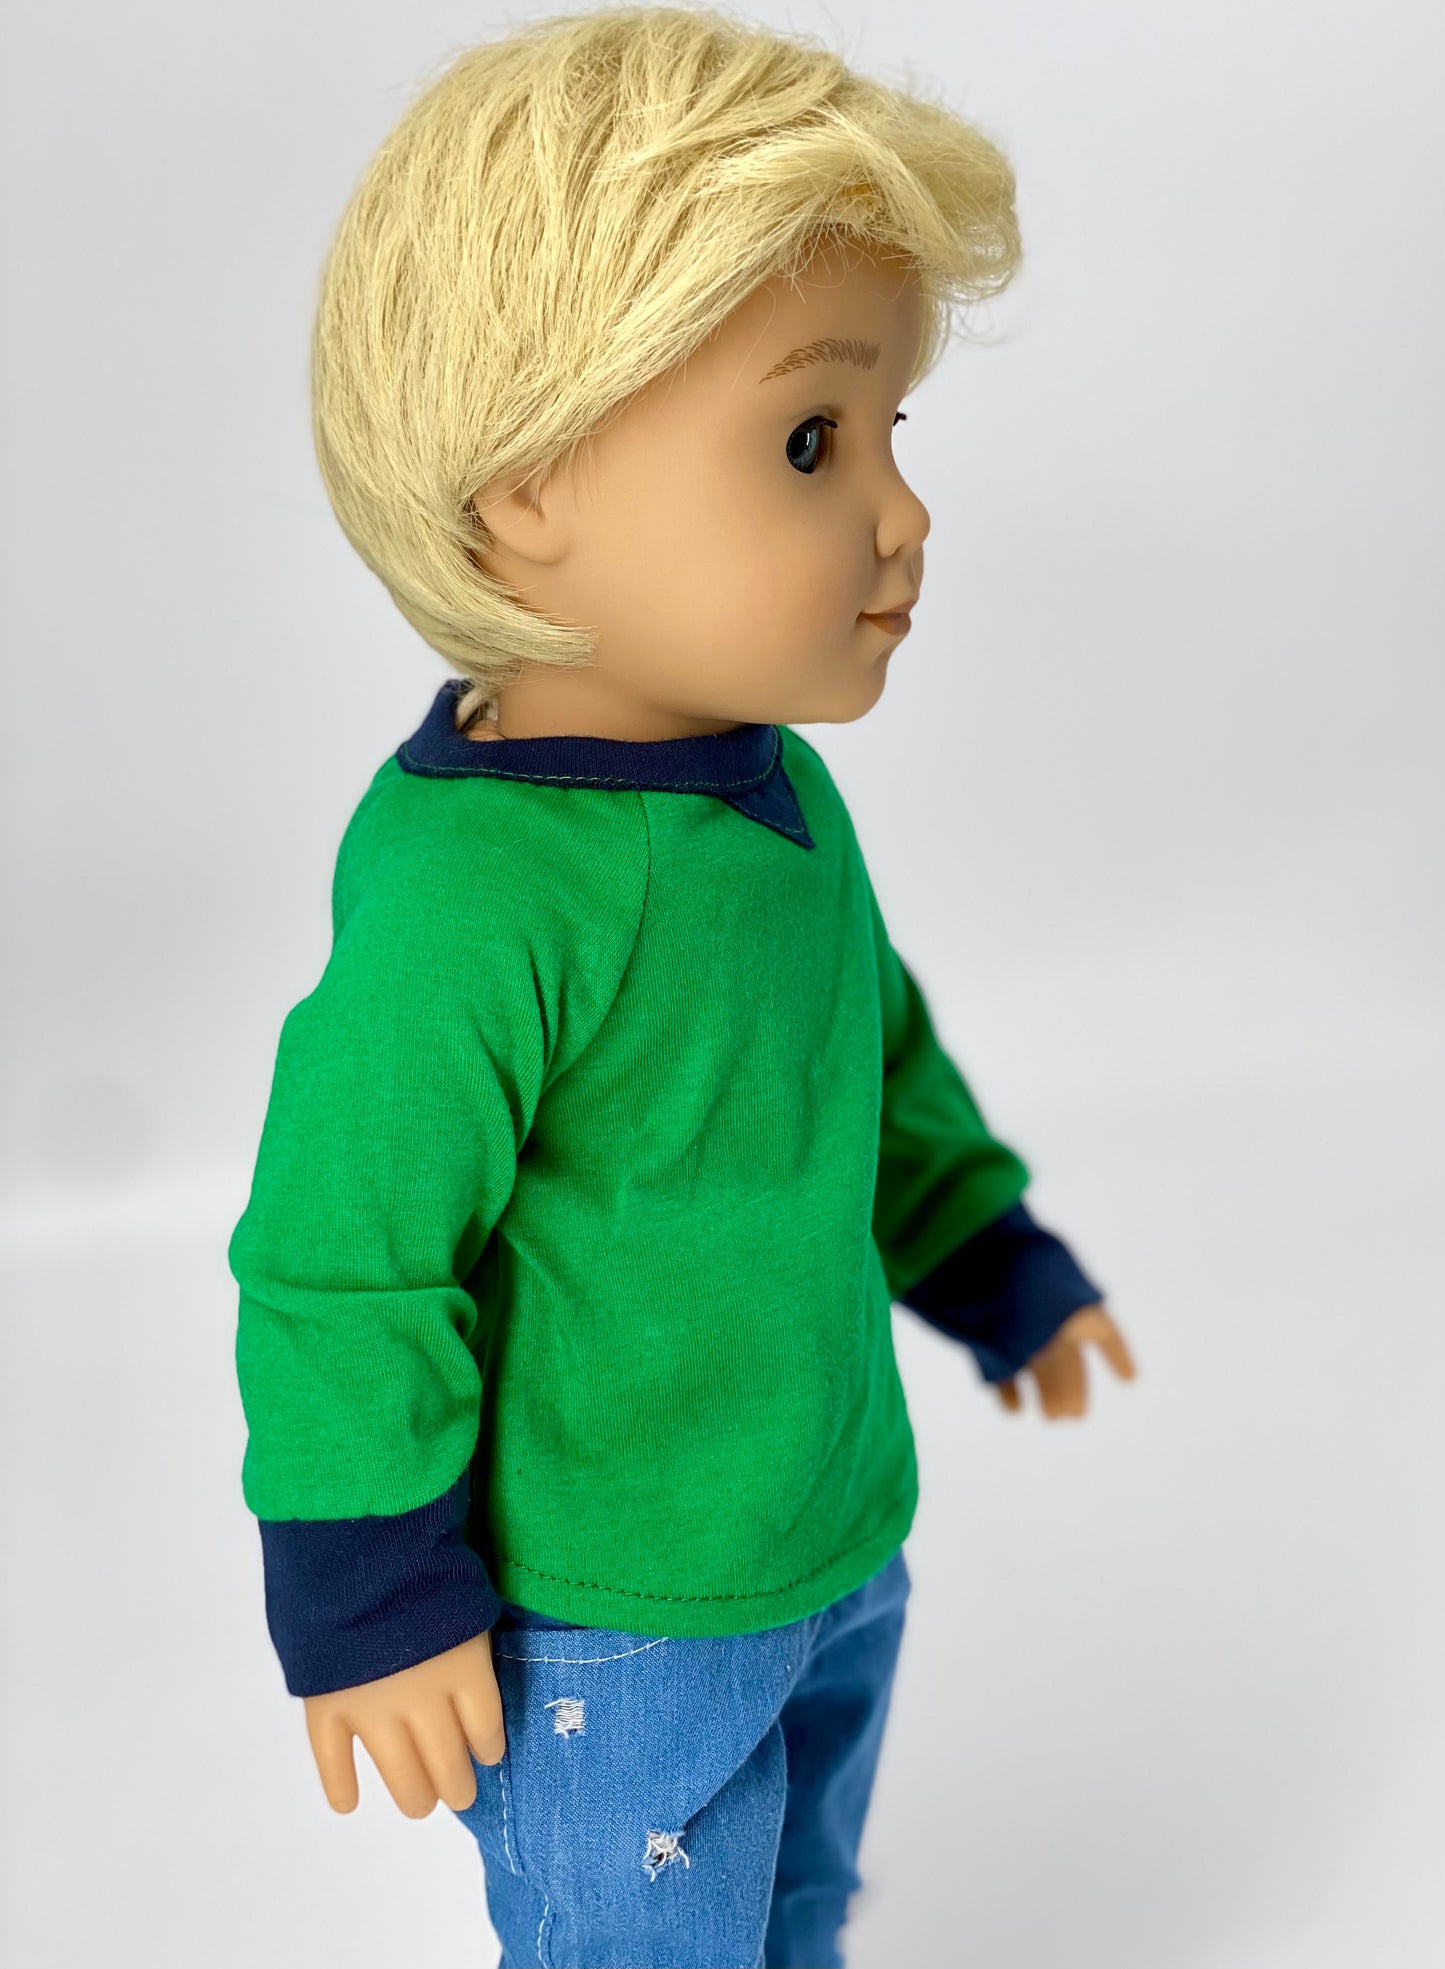 American Girl Doll Size 11.5” Wig “Vincent” in Warm Blonde